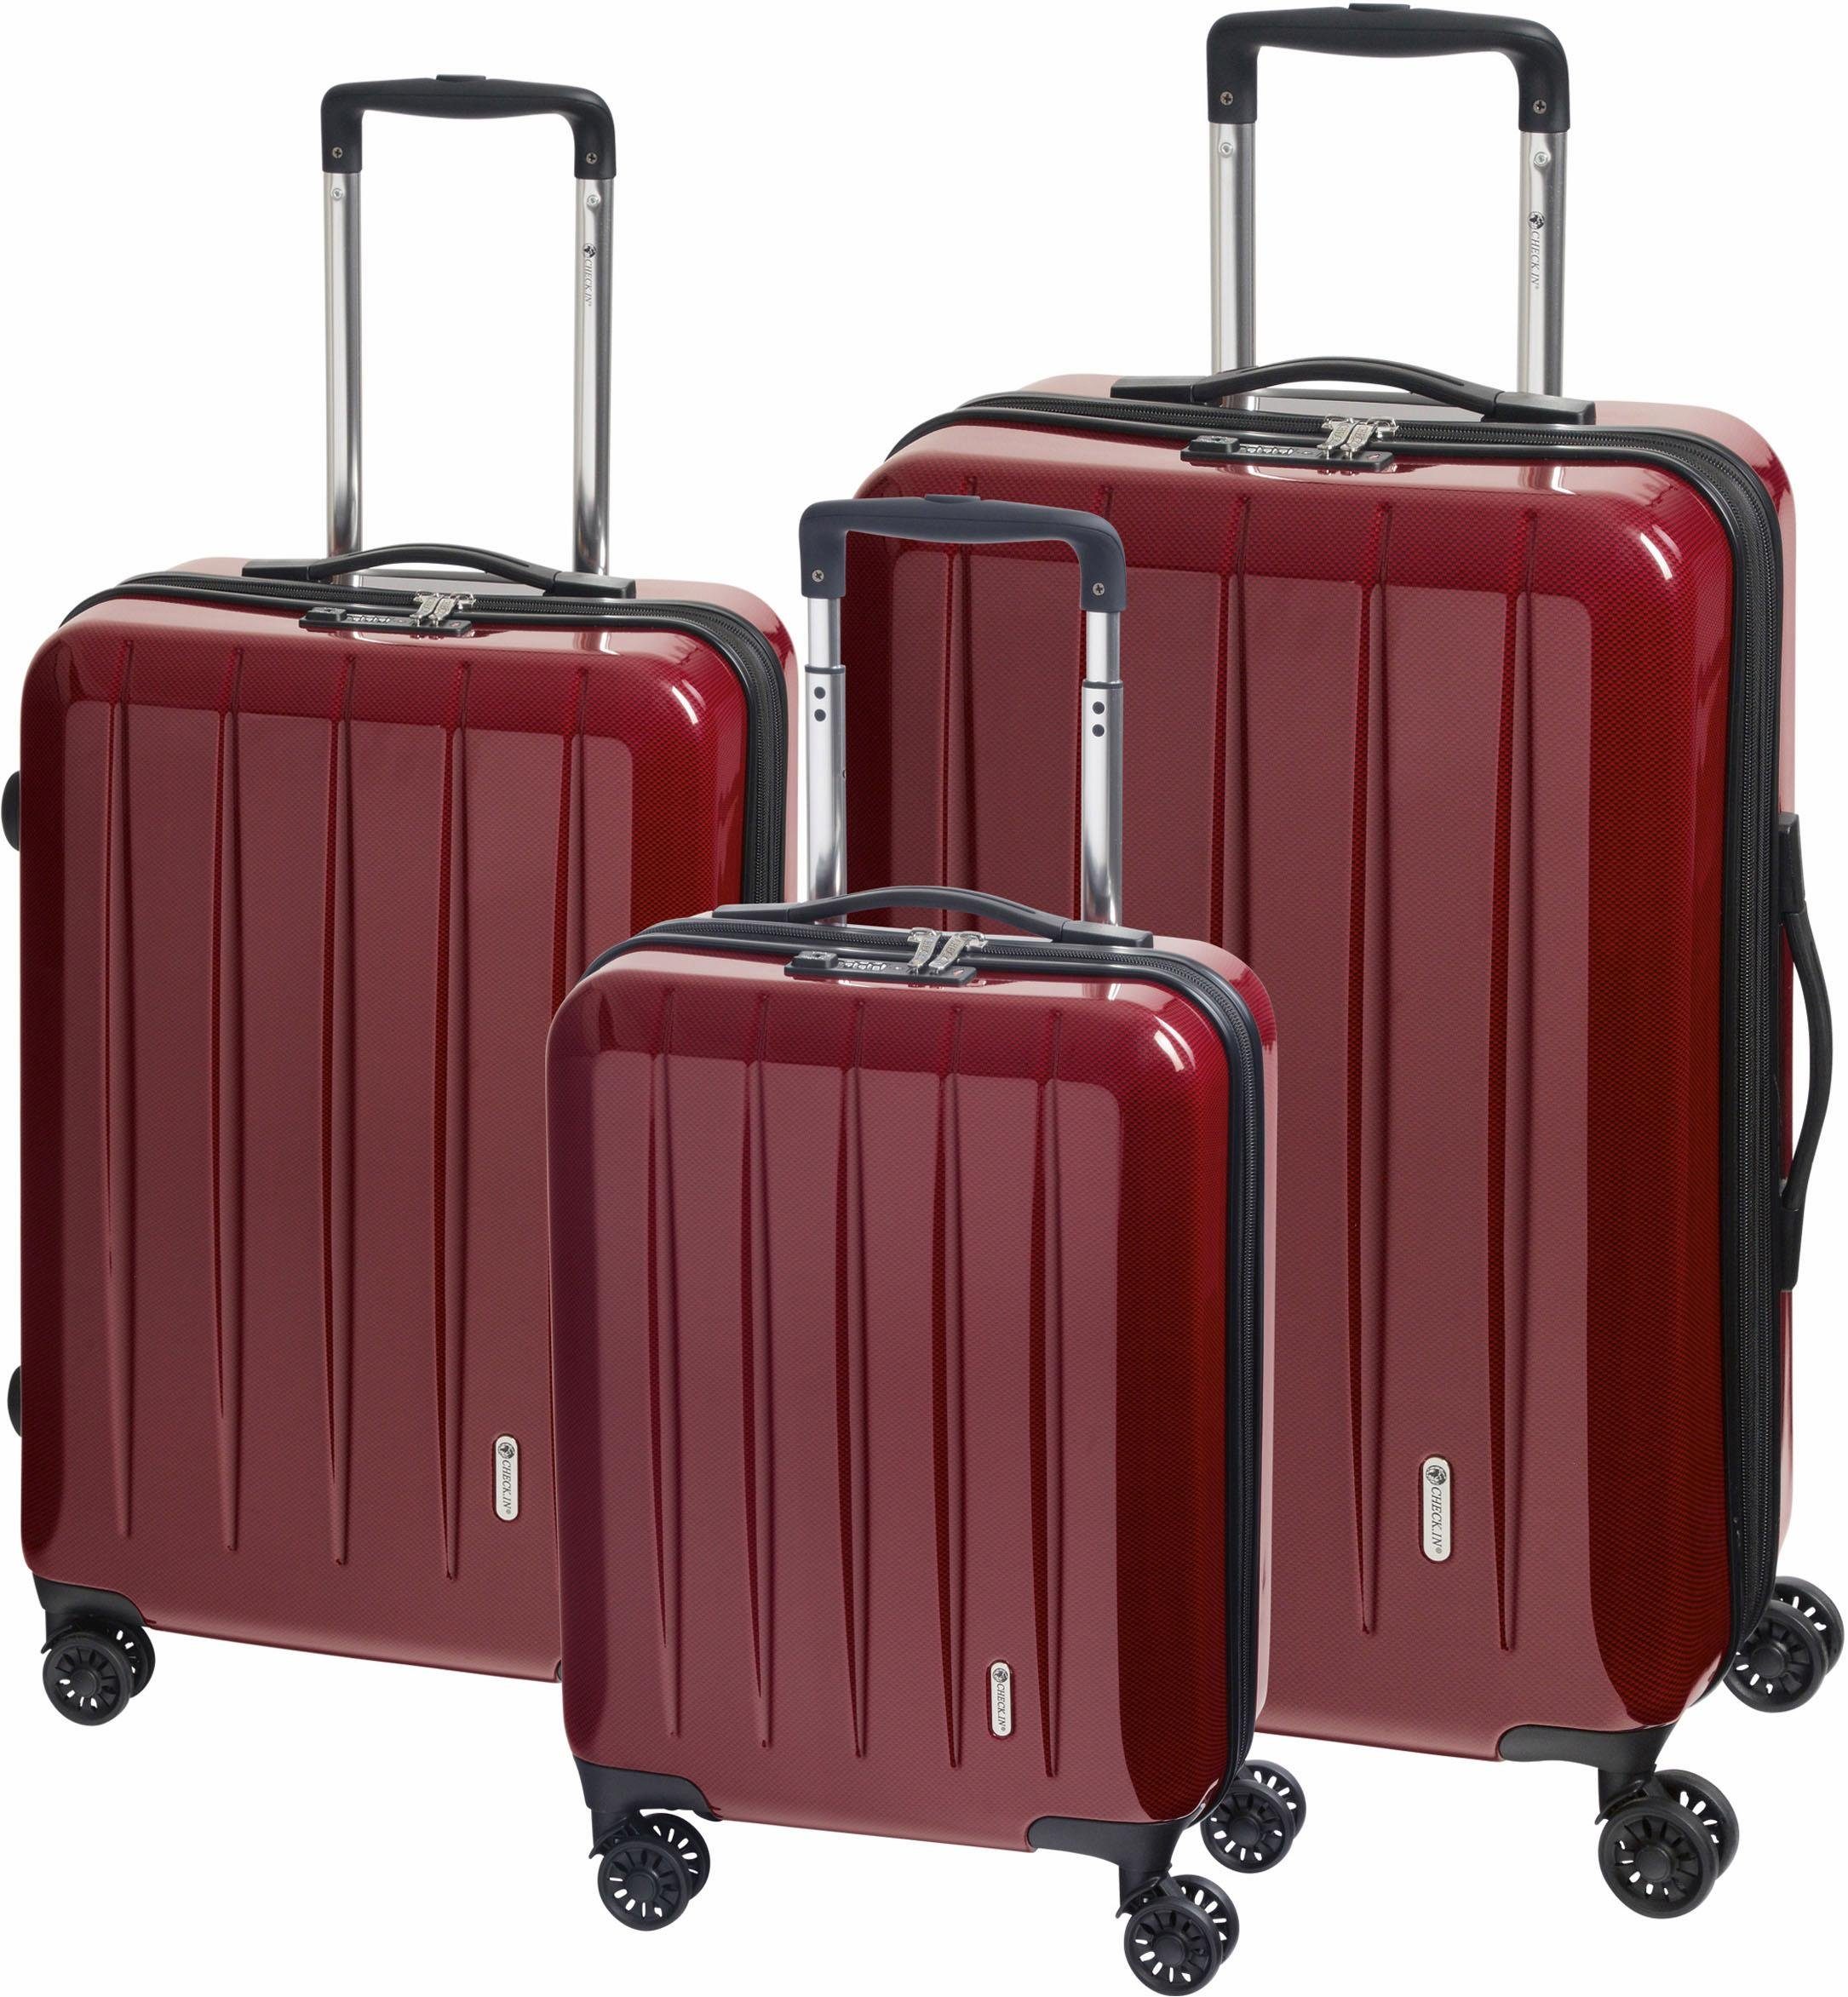 Carbon tlg) Rollen, 3 2.0, Rot CHECK.IN® Trolleyset (Set, London 4